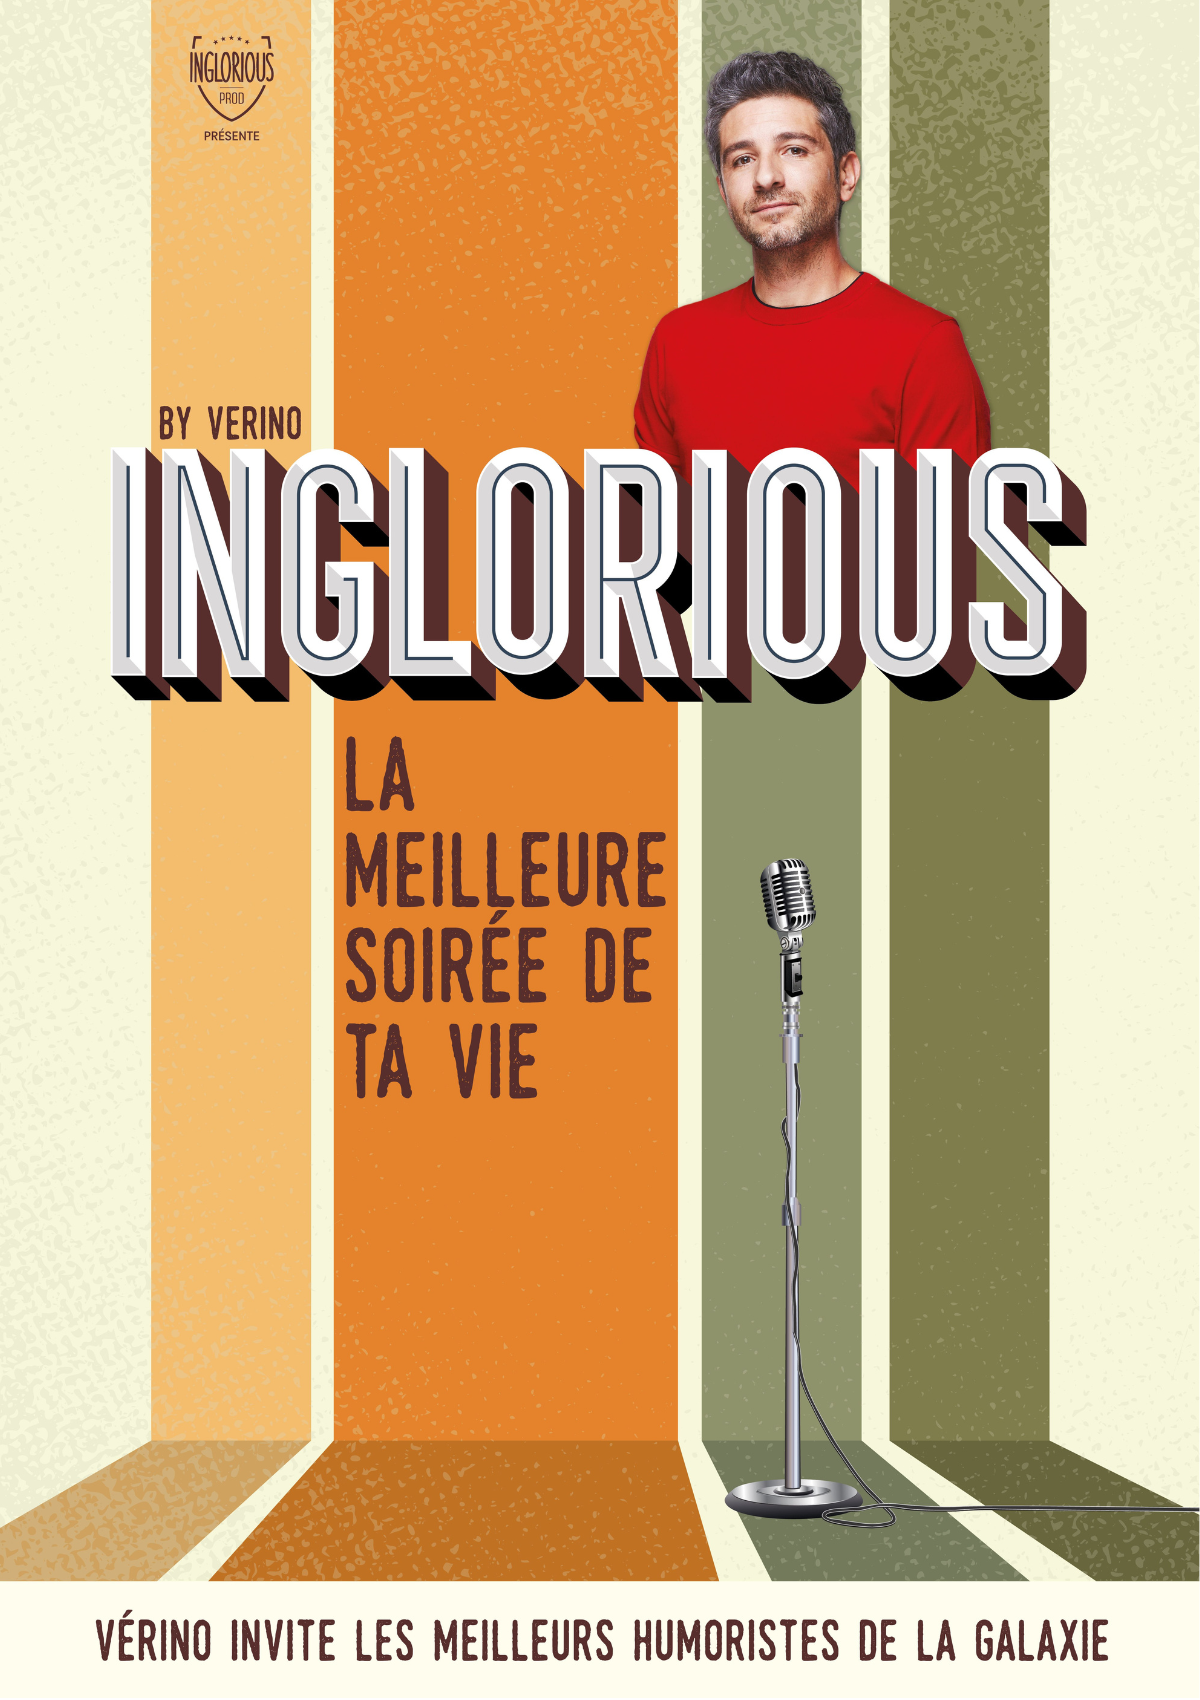 INGLORIOUS BY VERINO